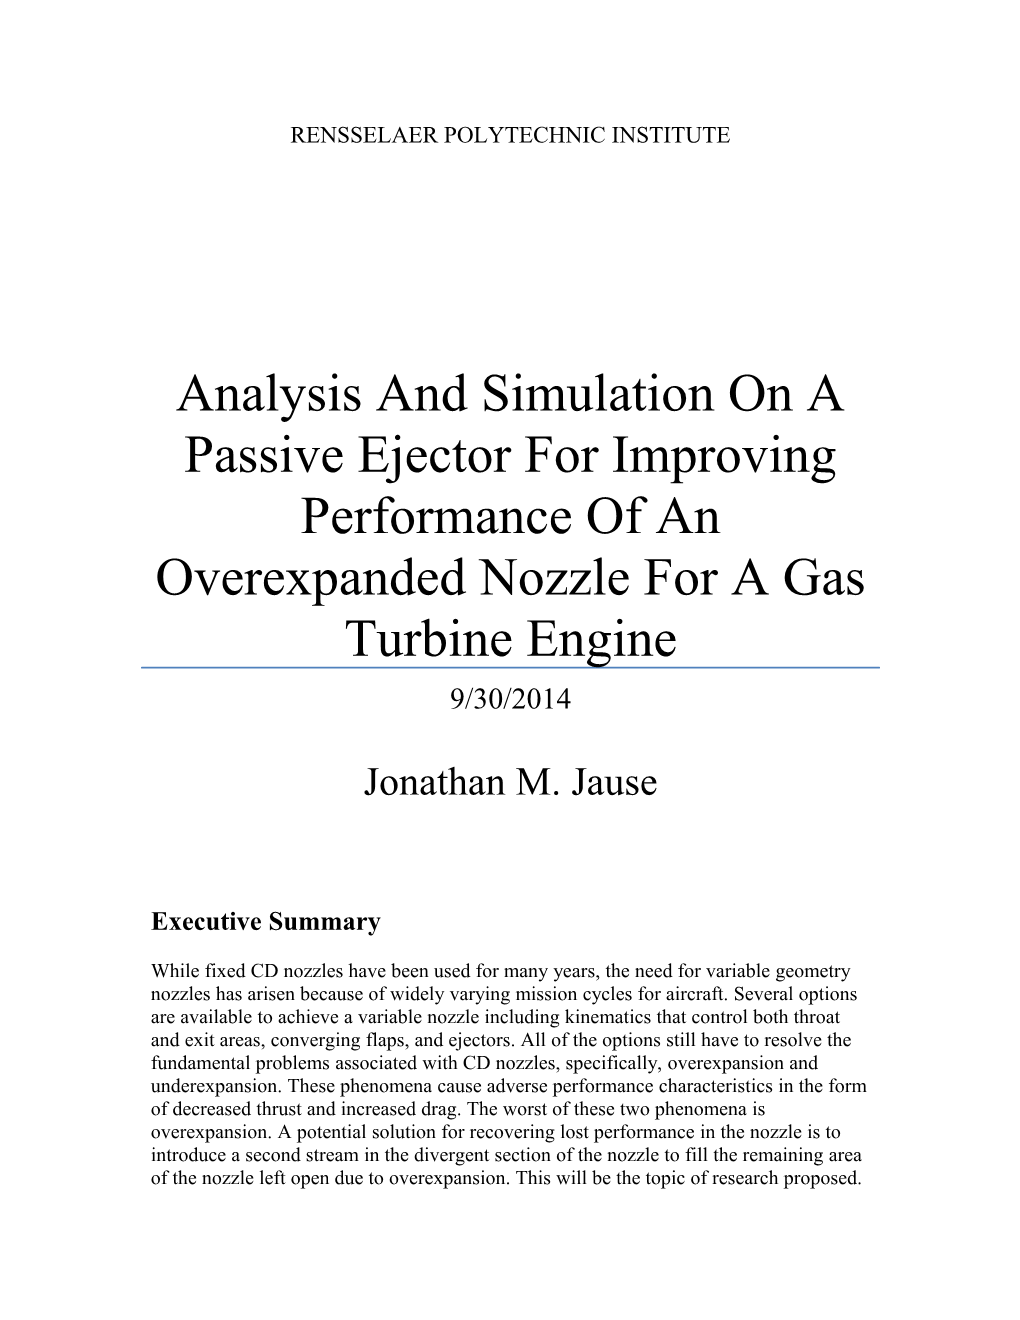 Analysis And Simulation On A Passive Ejector For Improving Performance Of An Overexpanded Nozzle For A Gas Turbine Engine